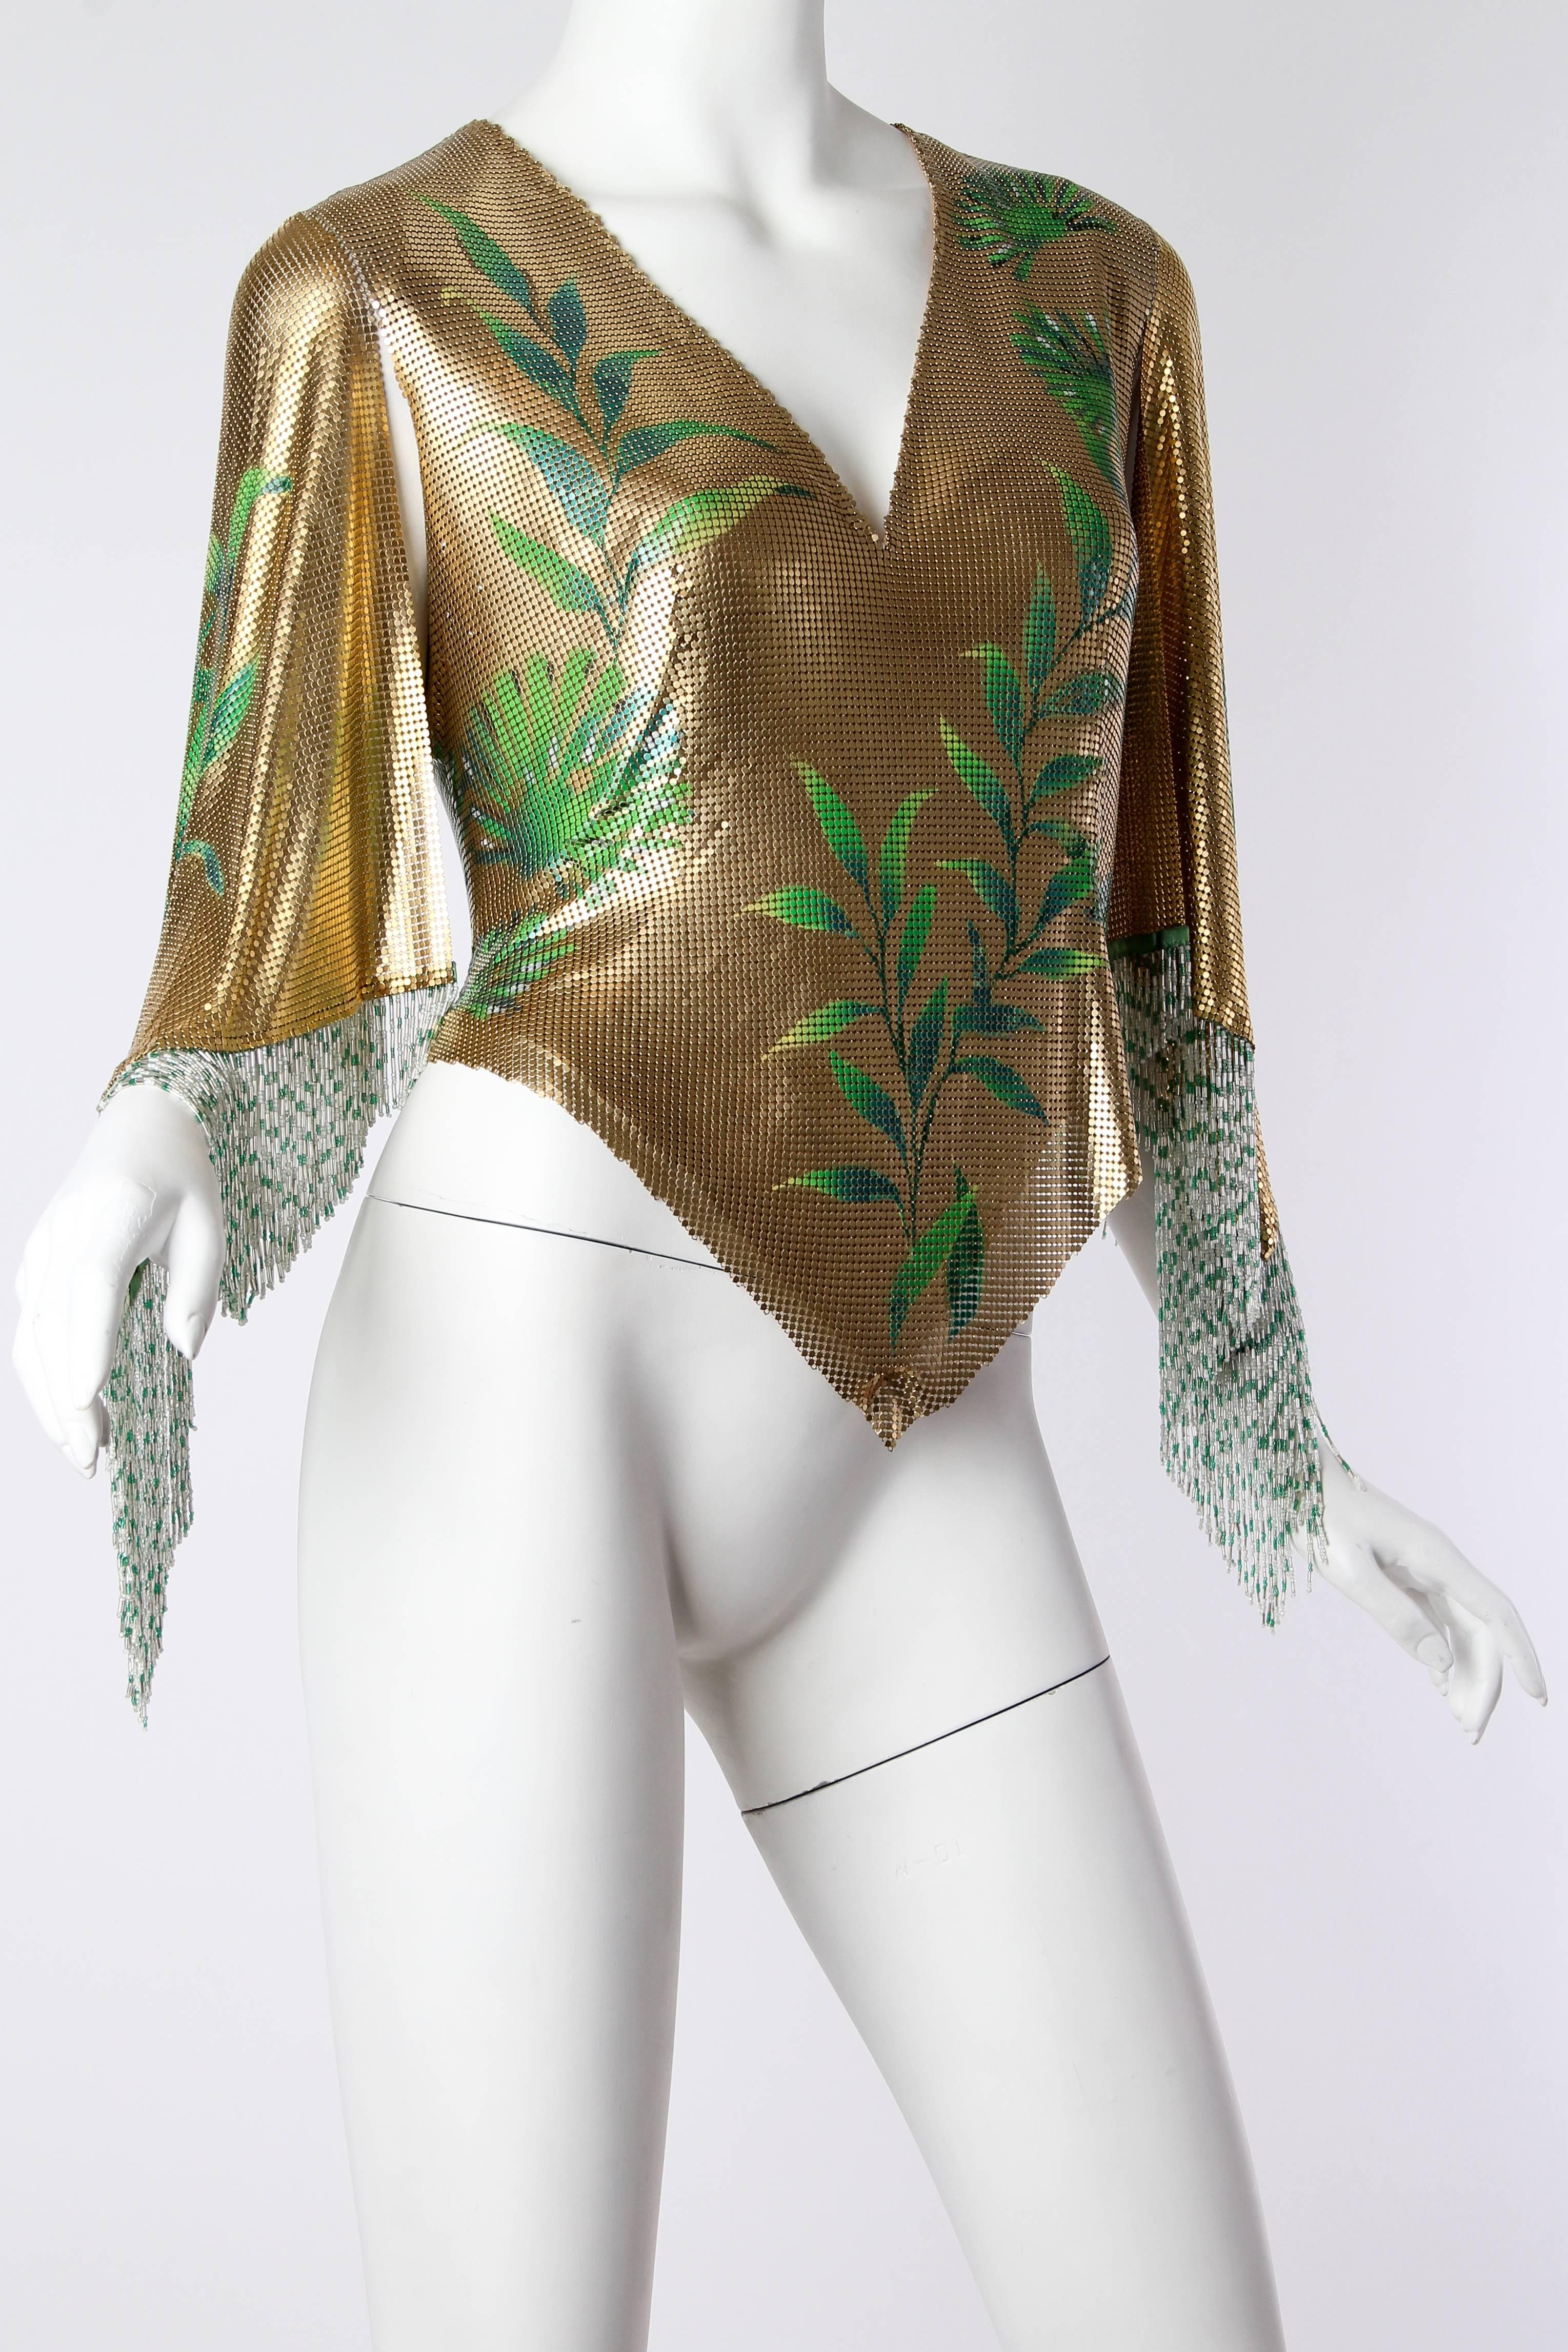 Women's Exceptionally Rare Hand Painted Gianni Versace Couture Metal Mesh Top